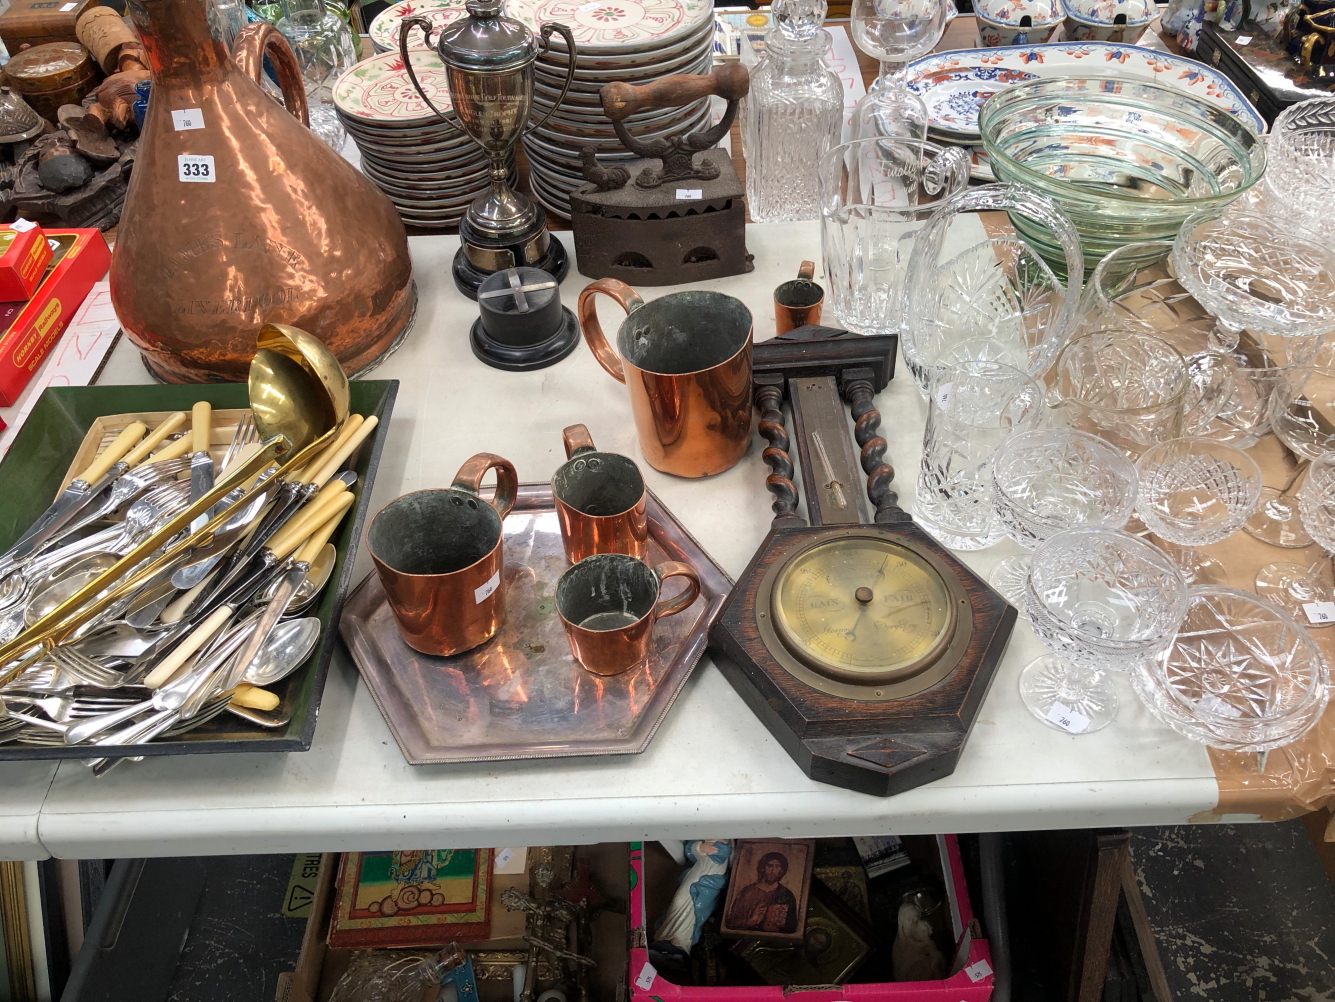 COPPER SPIRIT MEASURES, ELECTROPLATE CUTLERY, A TWO HANDLED TROPHY, DRINKING AND OTHER GLASS